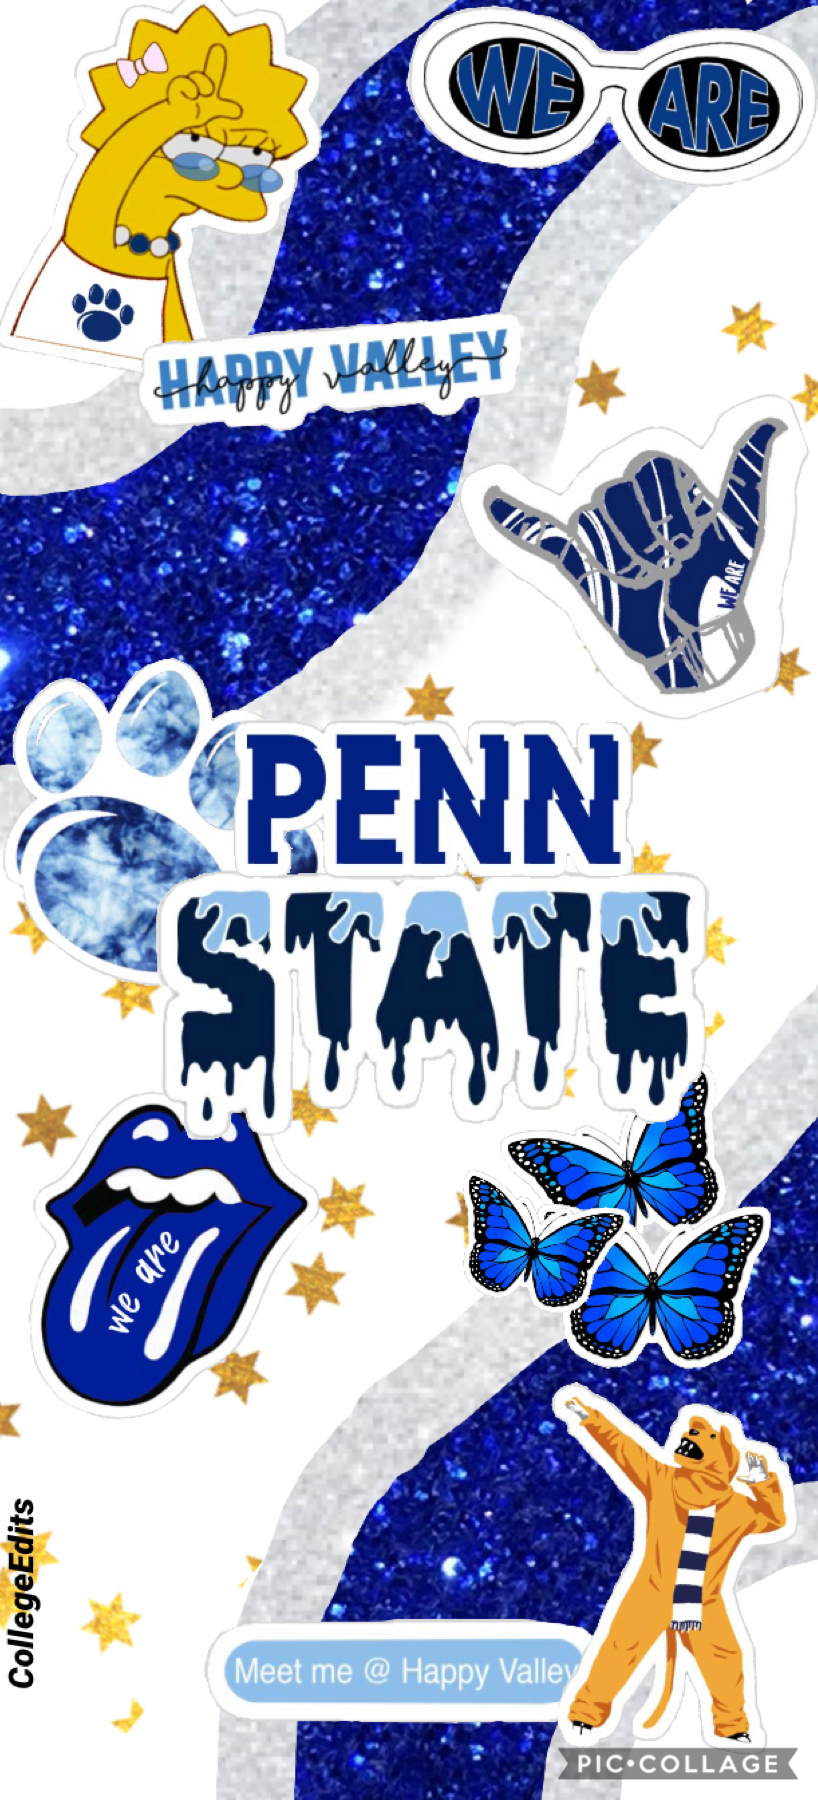 A quick Penn State edit I did 🤩